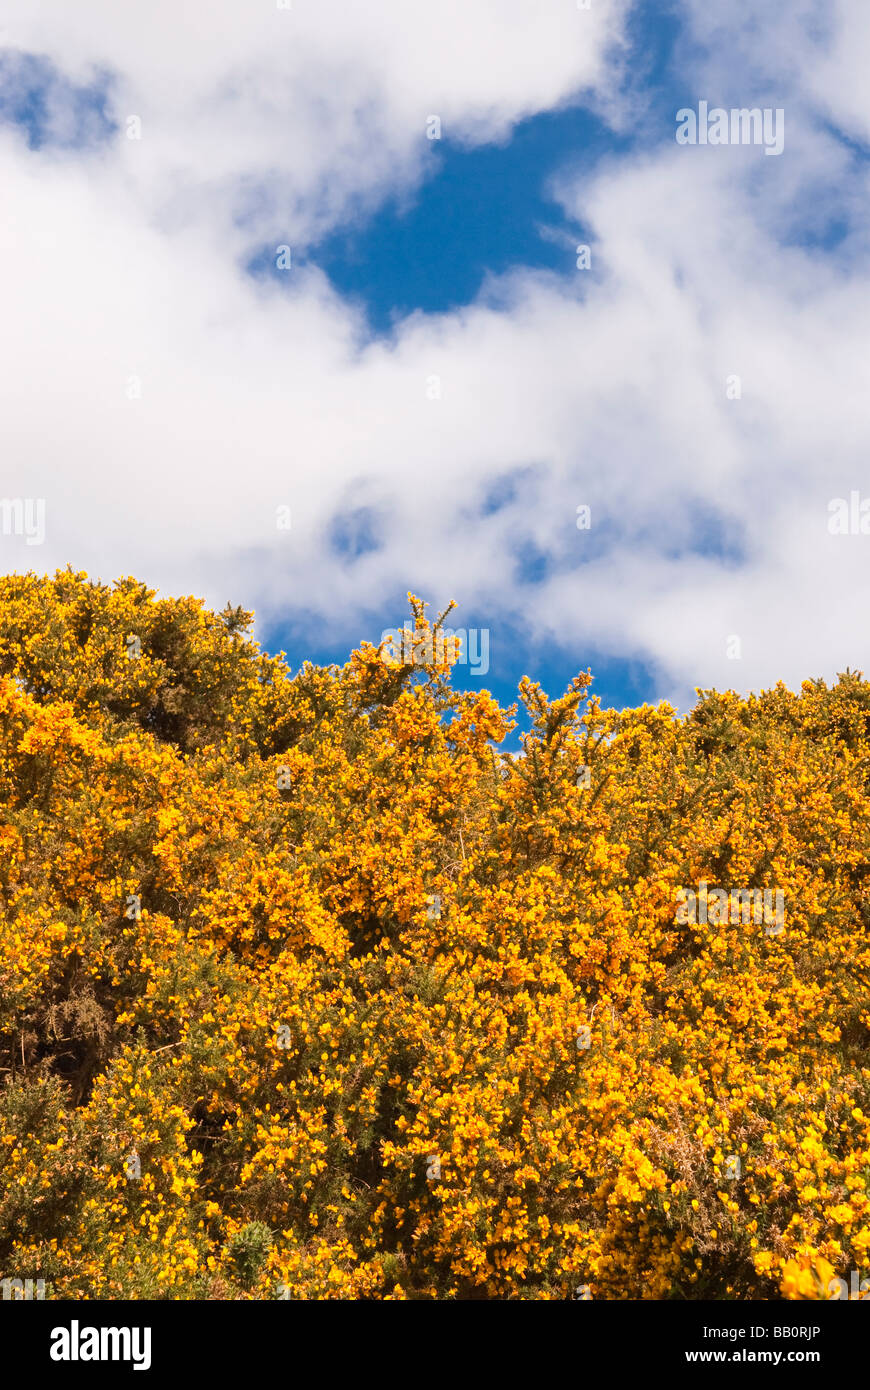 A Common gorse bush (ulex europaeus) against a blue sky with yellow flowers in the uk Stock Photo